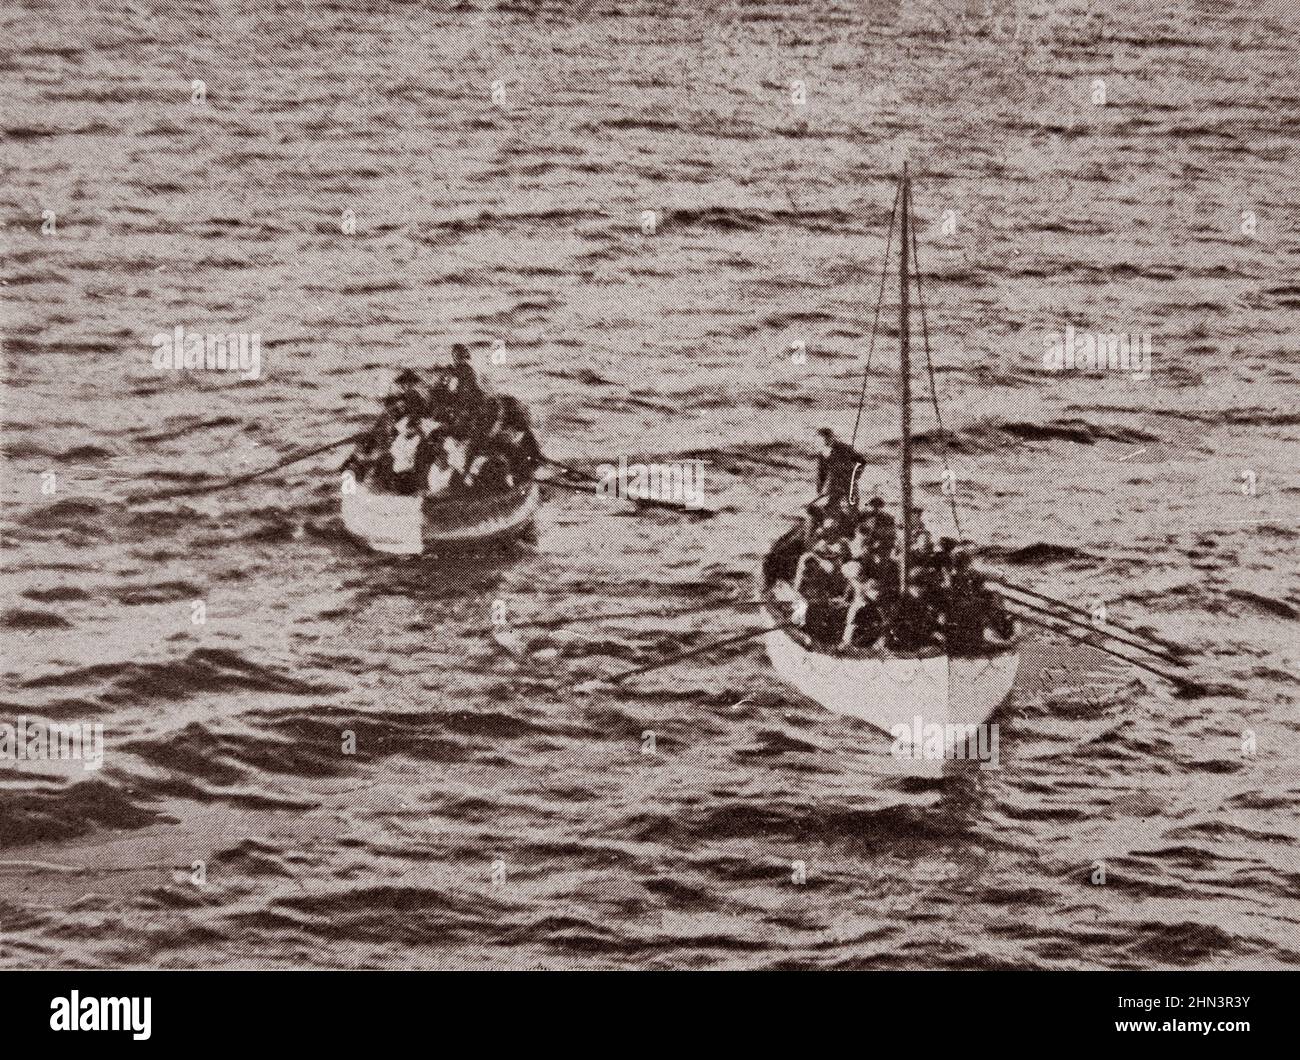 Vintage photo of lifeboat commanded by the fifth officer of the Titanic, Mr. Harold Lowe, who had a sail hoisted and was able to collect, at daybreak, Stock Photo